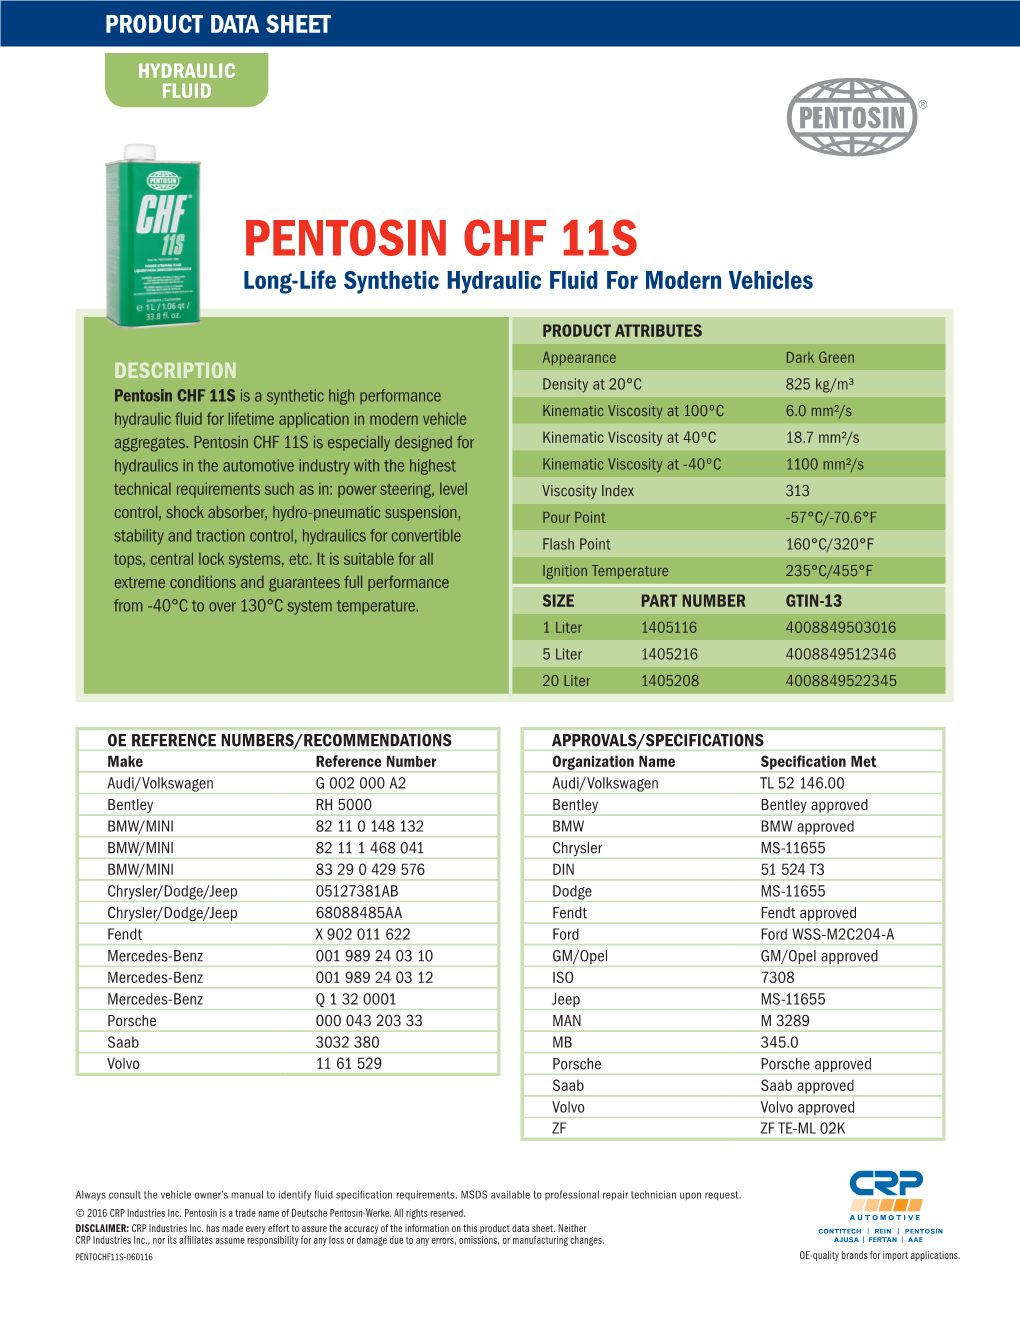 PENTOSIN CHF 11S Long-Life Synthetic Hydraulic Fluid for Modern Vehicles